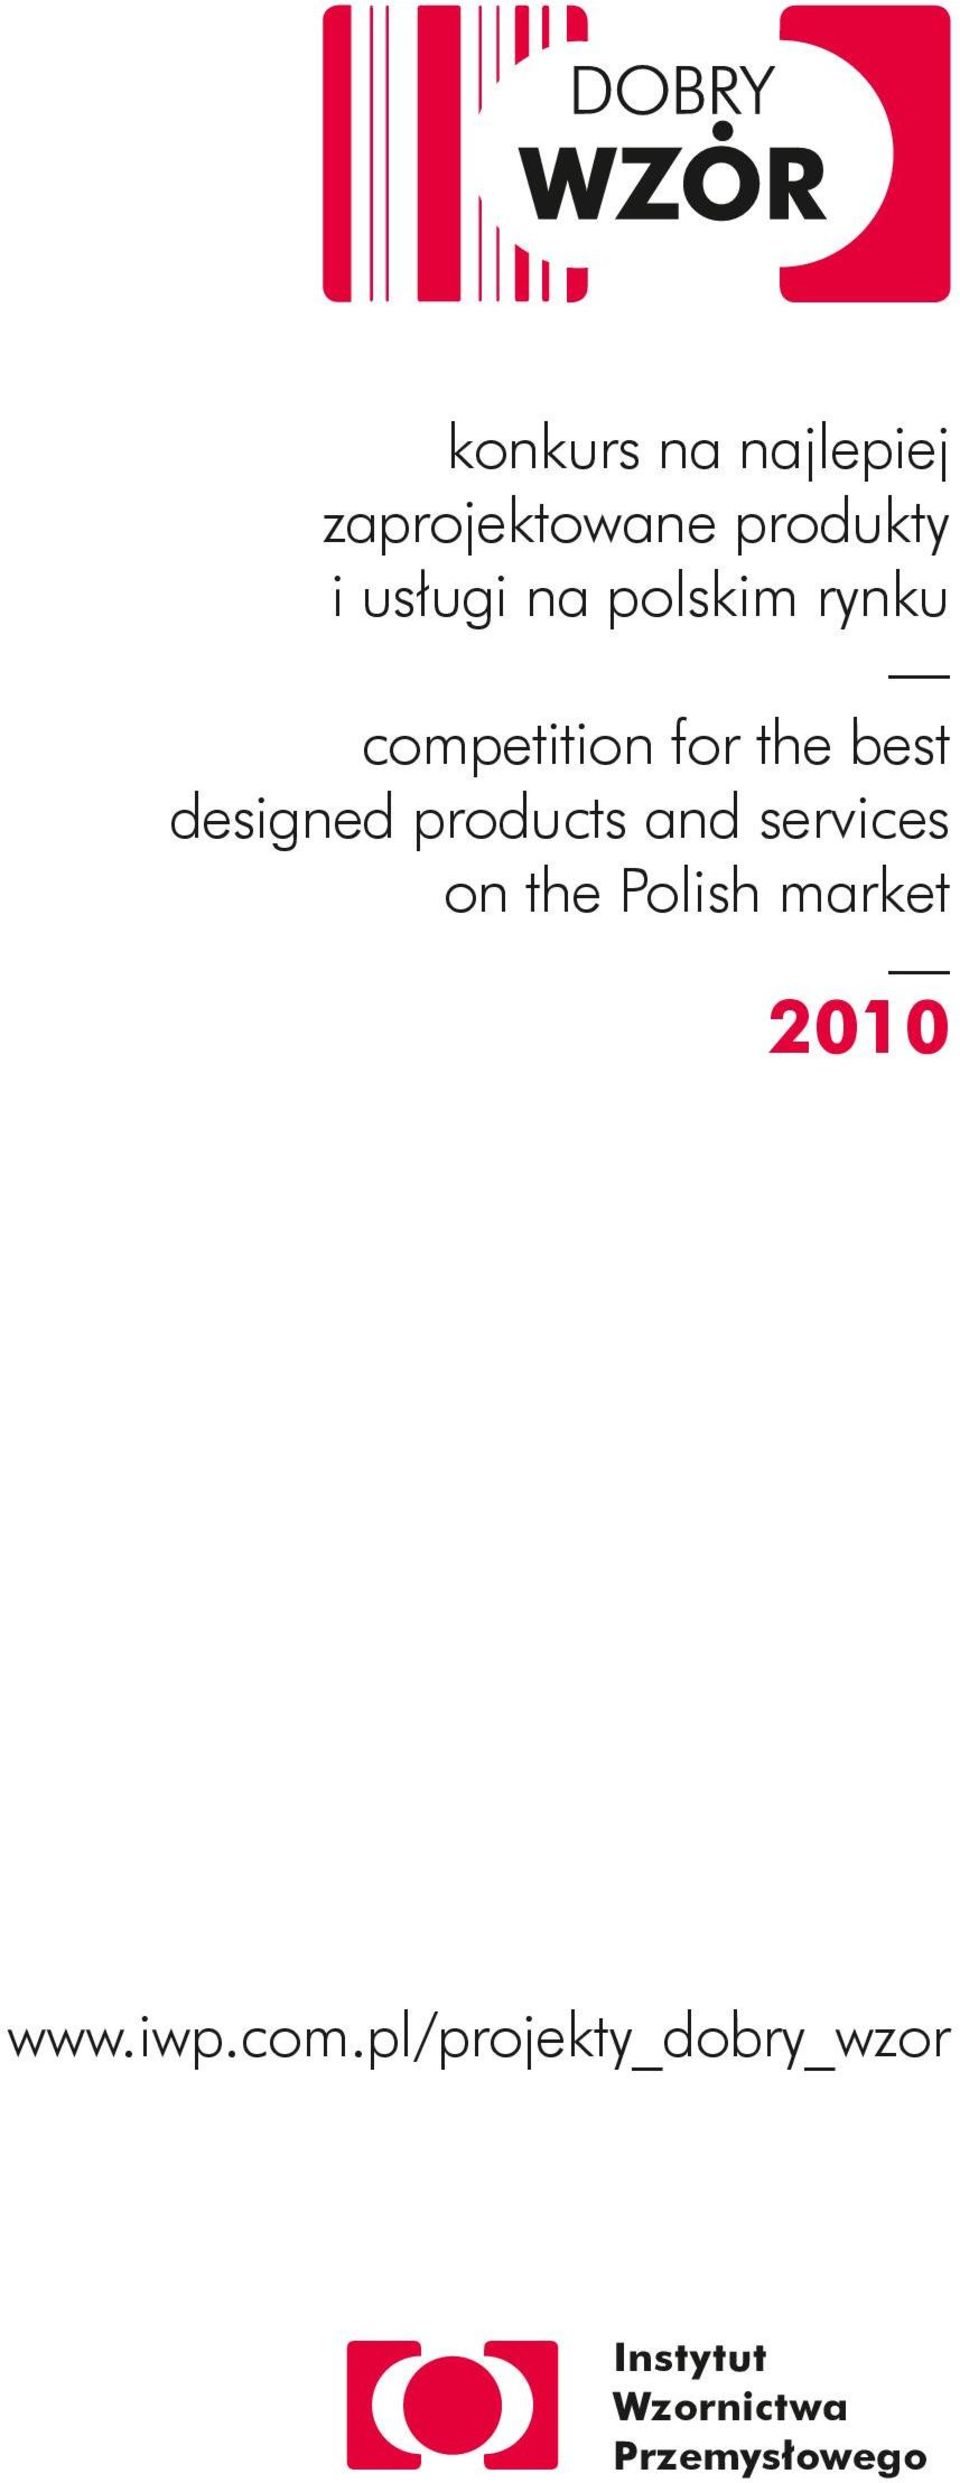 products and services on the Polish market 2010 www.iwp.